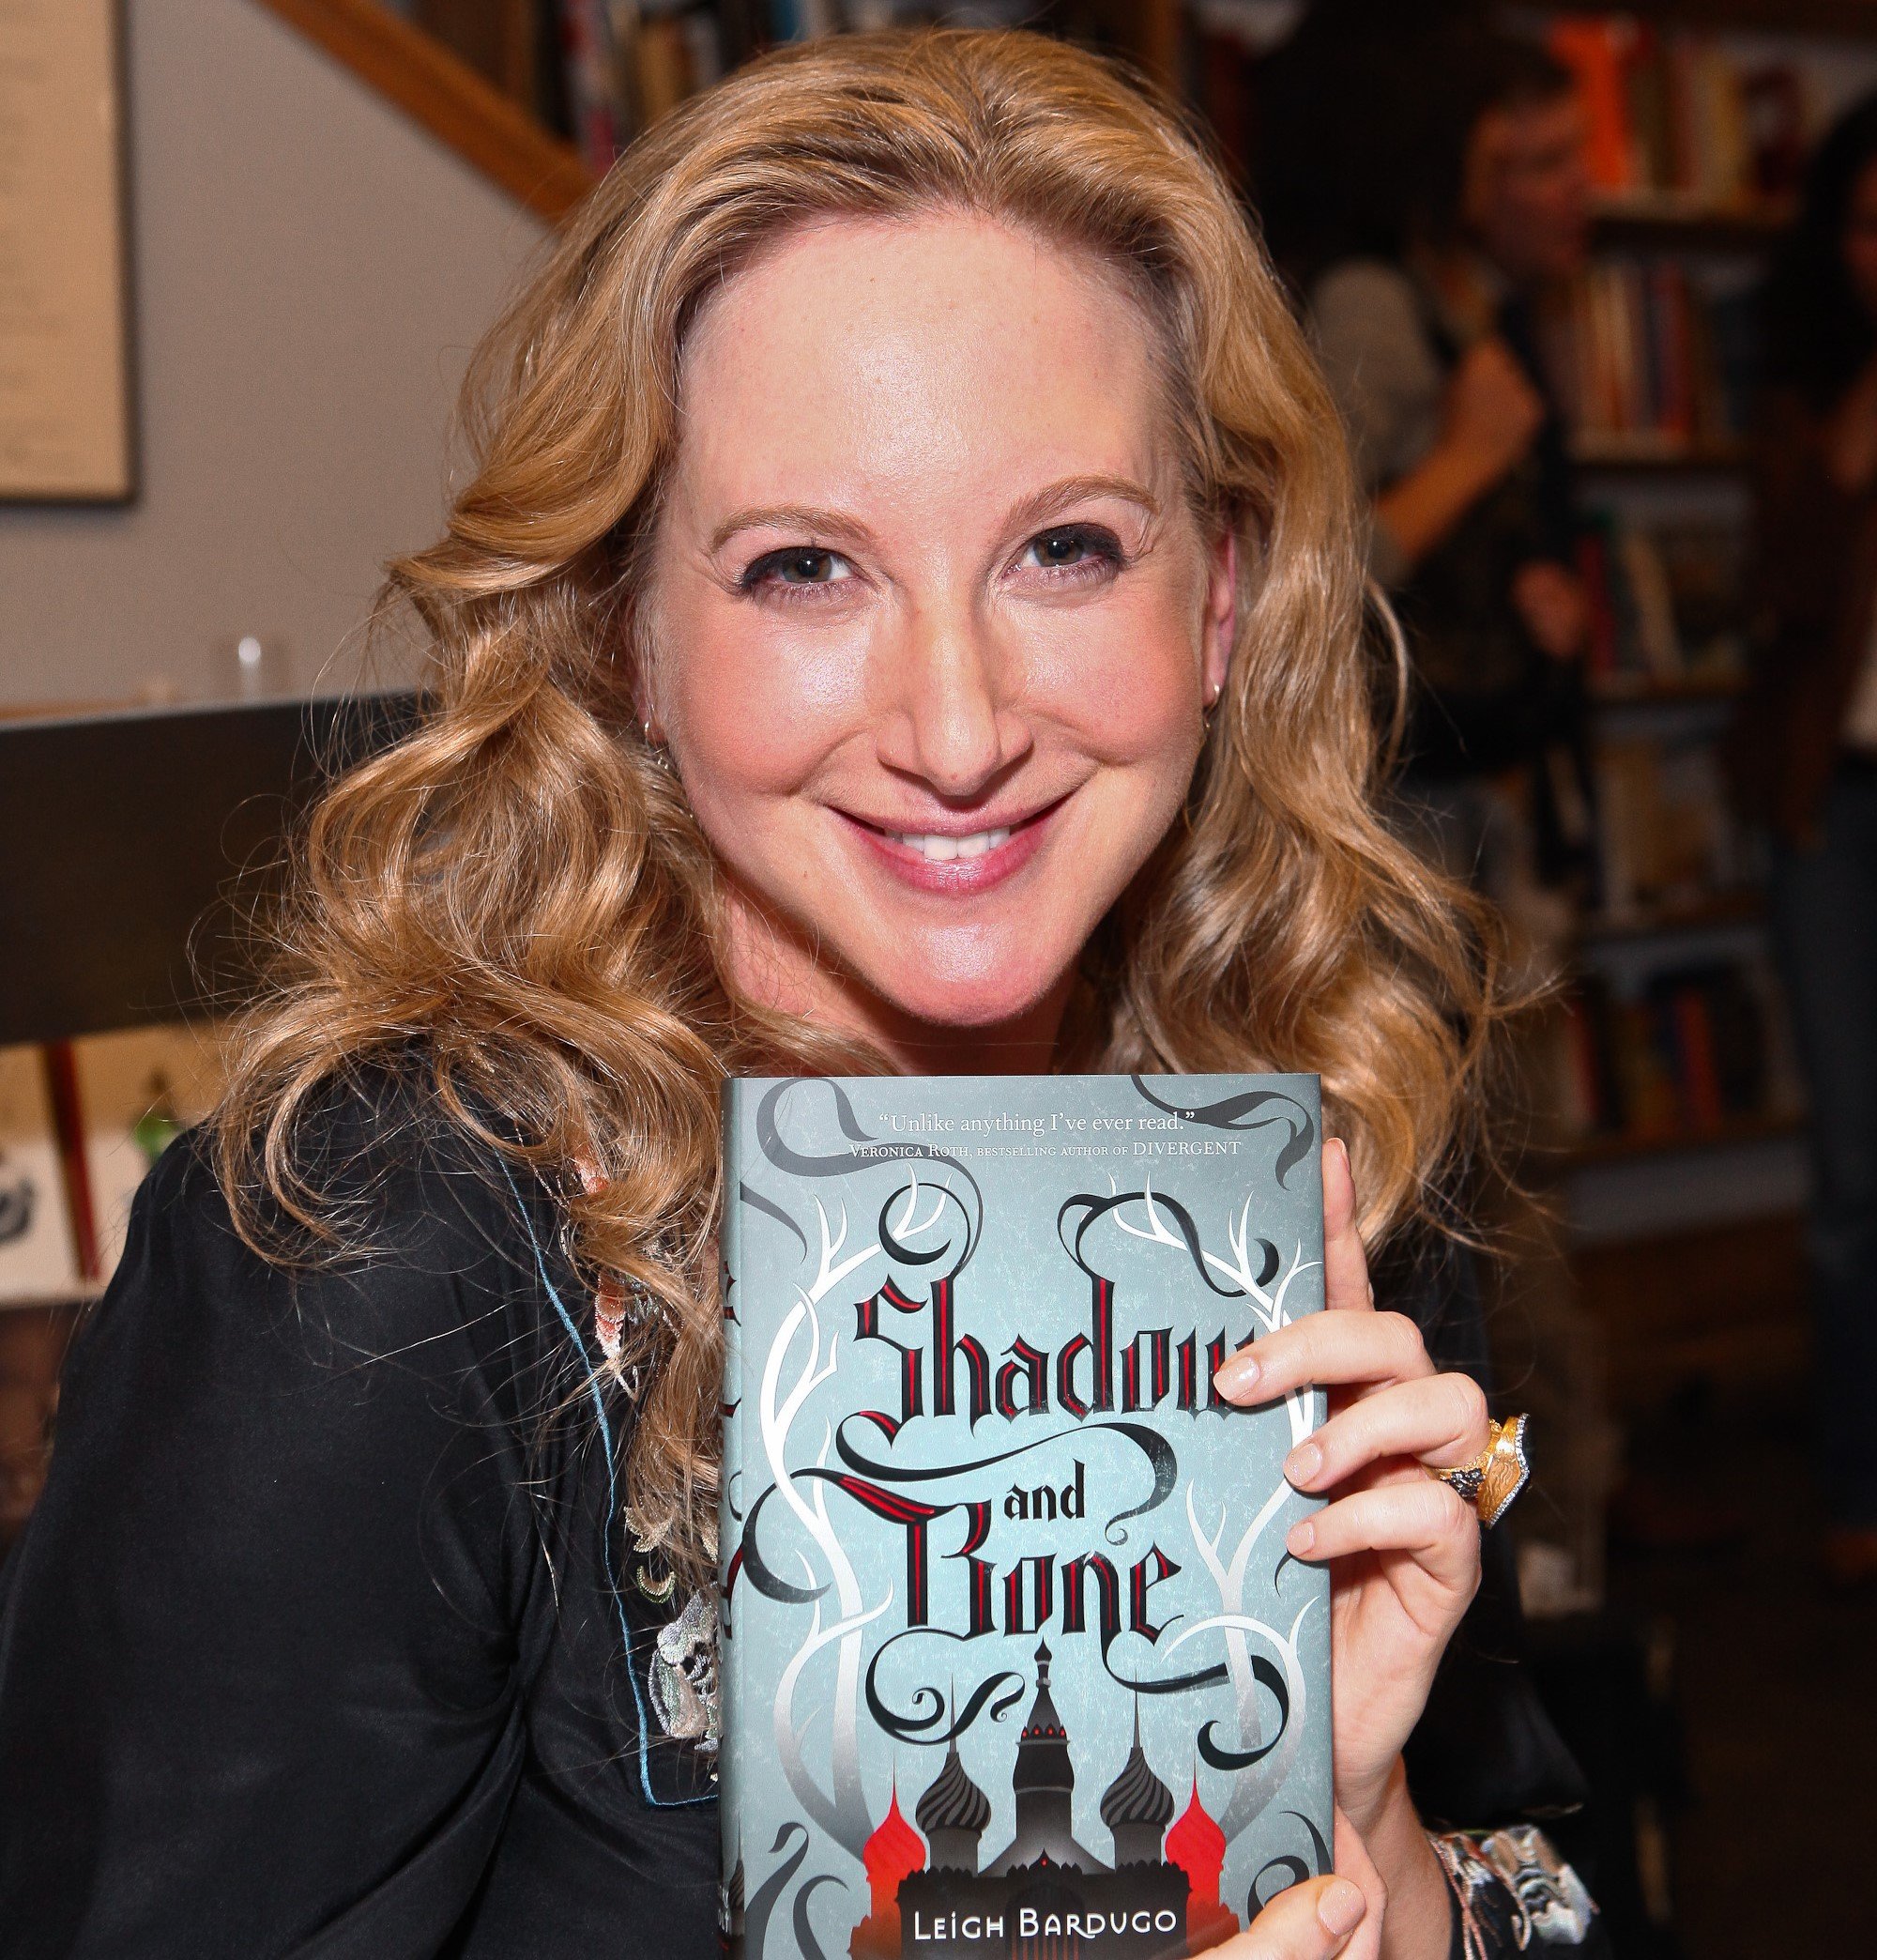 Author Leigh Bardugo signs copies of her debut novel 'Shadow And Bone'